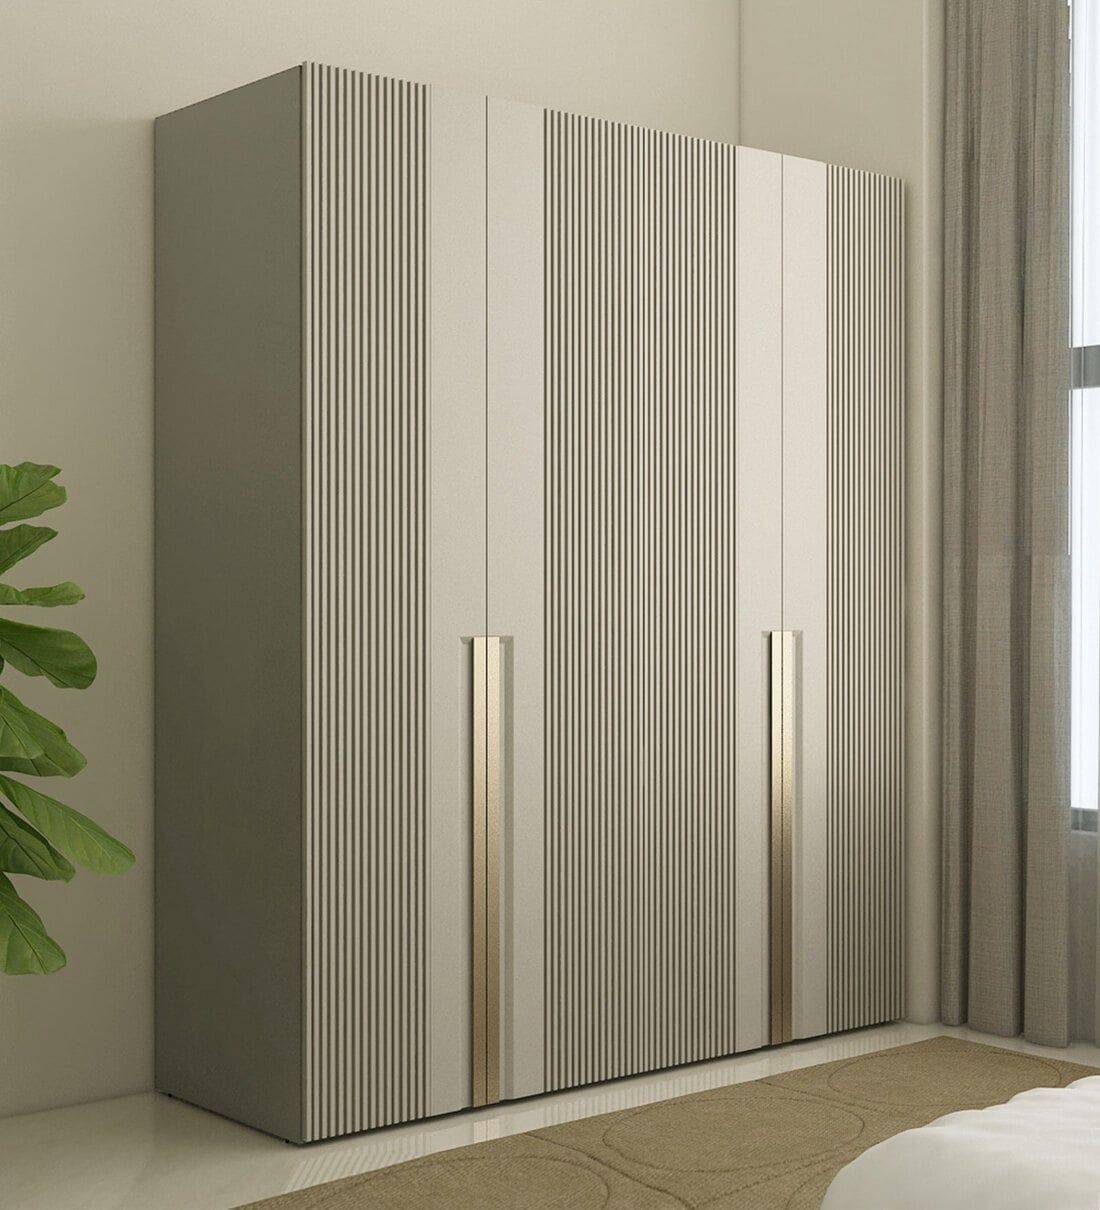 Buy Astor Modern 4 Door Wardrobe In Cashmere Colour With Stripes At 26% Off Spacewood | Pepperfry Pertaining To 4 Door Wardrobes (View 10 of 15)